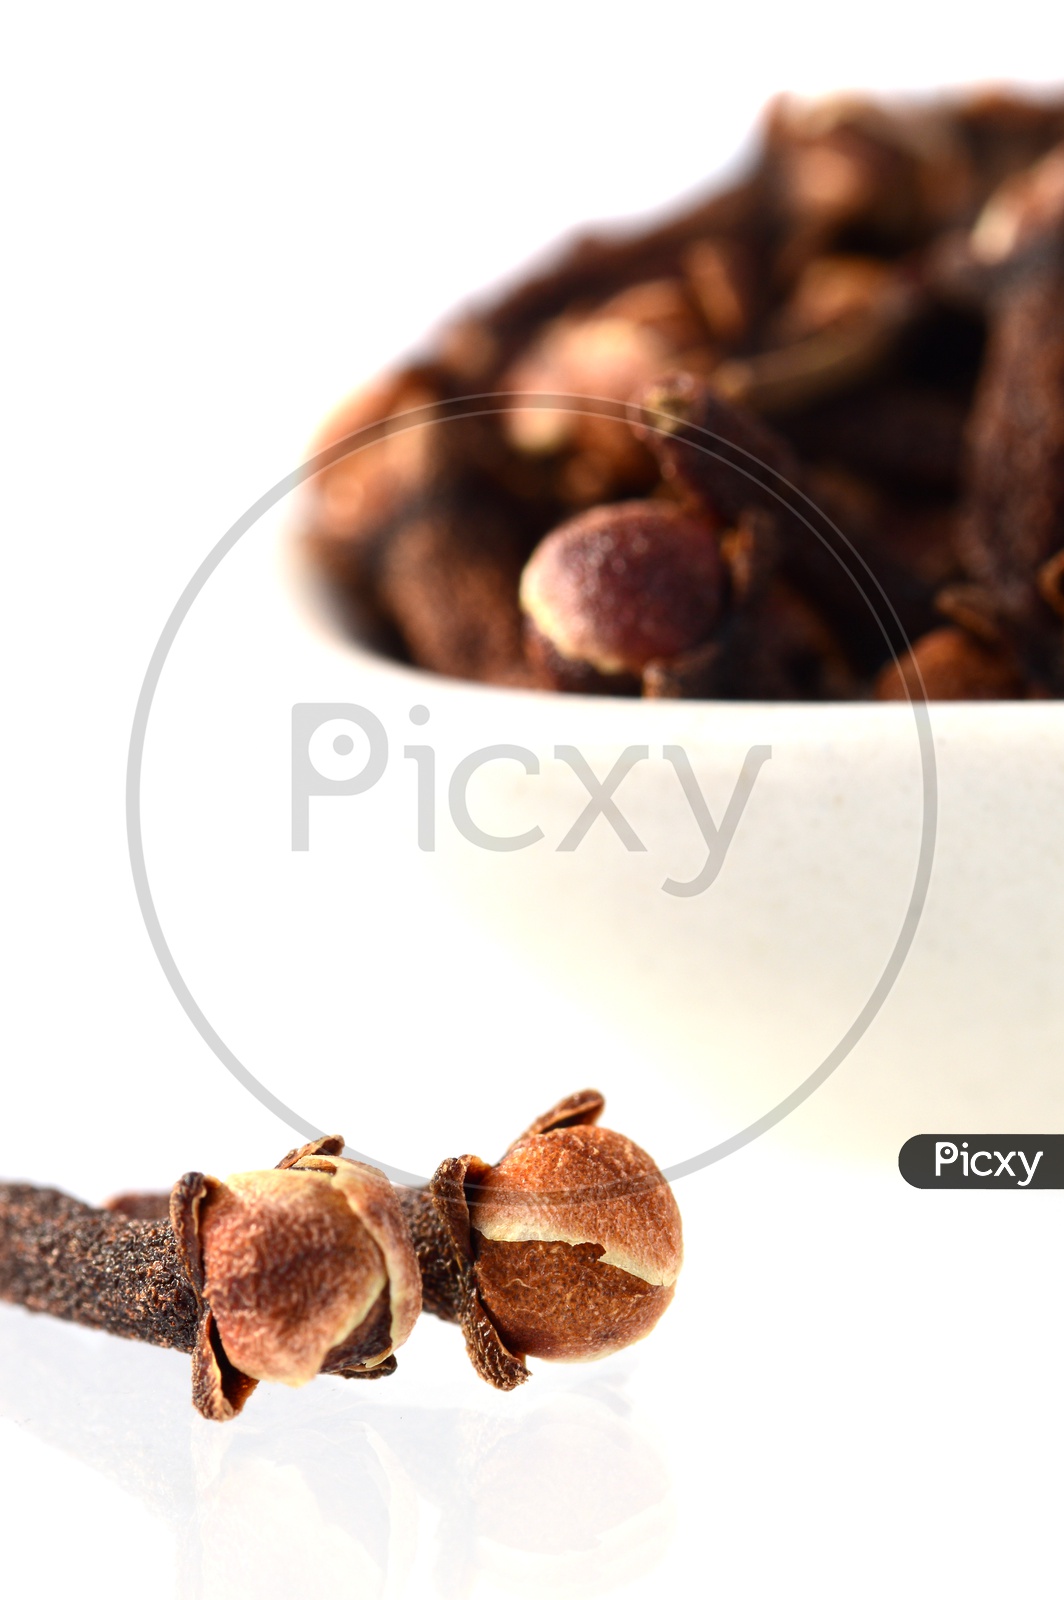 Cloves Or Indian Spices Cloves In a Bowl On An Isolated White Background